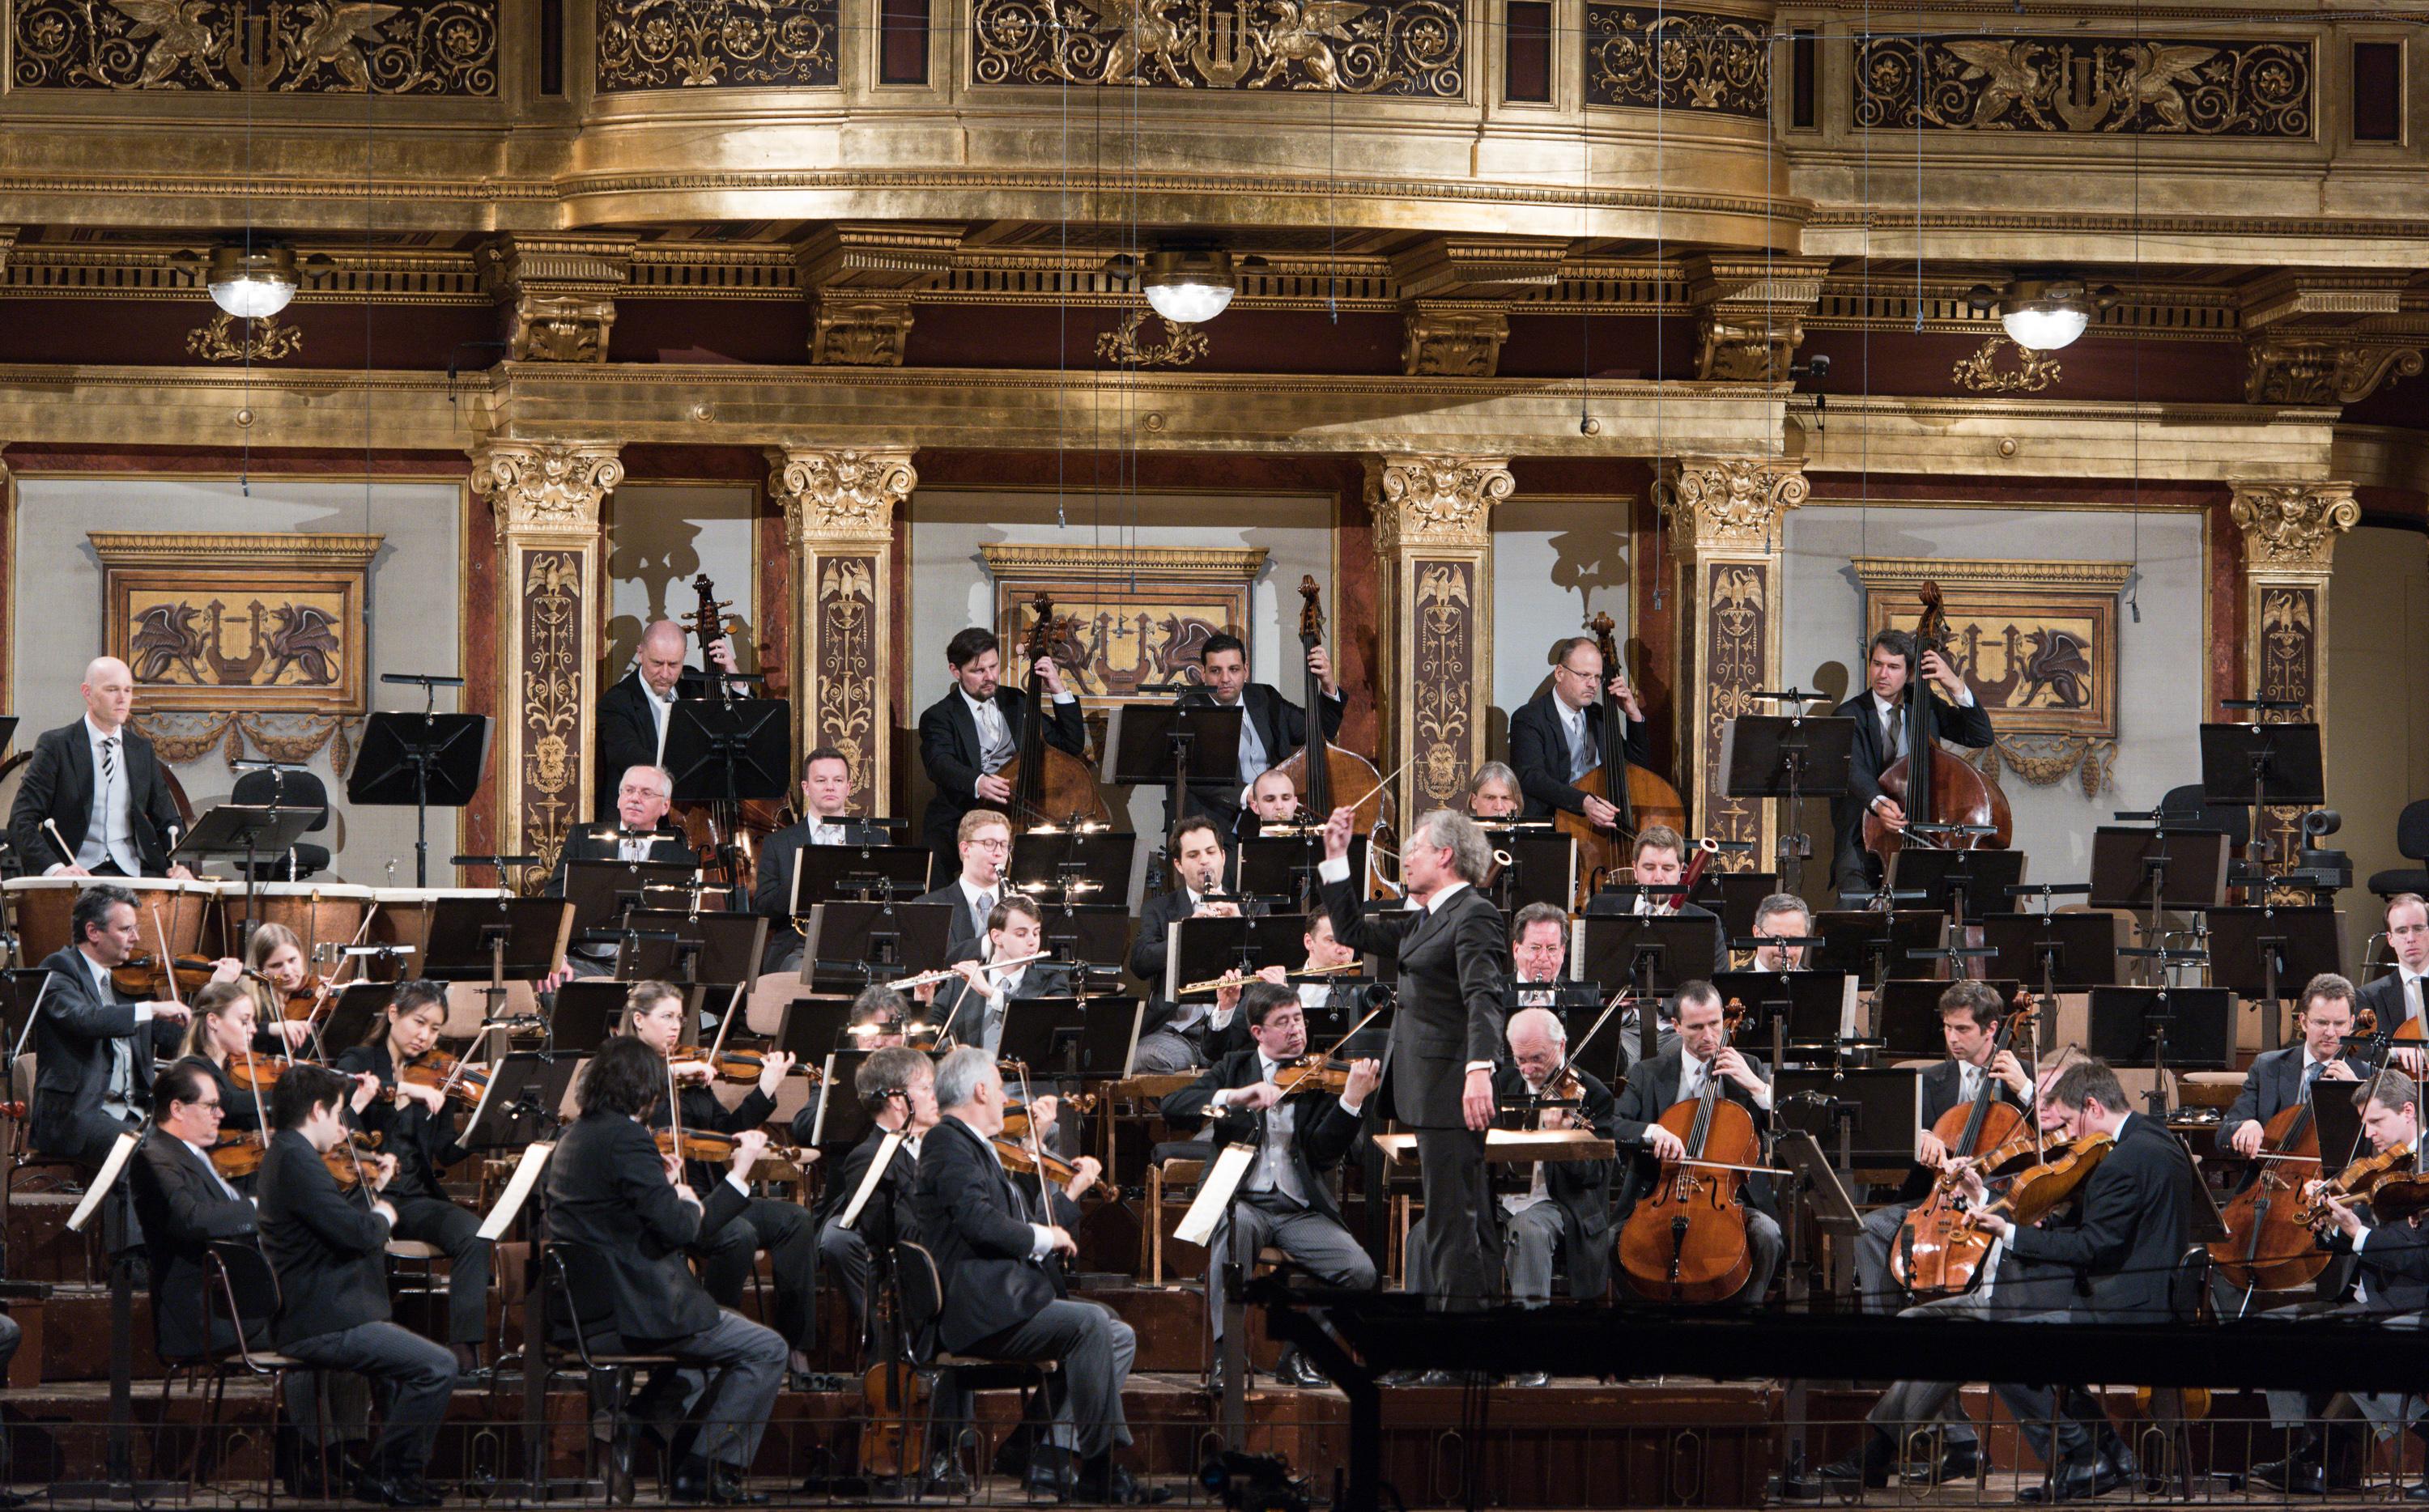 After an 11-year hiatus, the internationally renowned Vienna Philharmonic Orchestra is returning to Hong Kong to stage two concerts, on October 24 and 25 respectively, by invitation from the Leisure and Cultural Services Department. Photo shows the Vienna Philharmonic Orchestra. (Source of photo: Terry Linke)